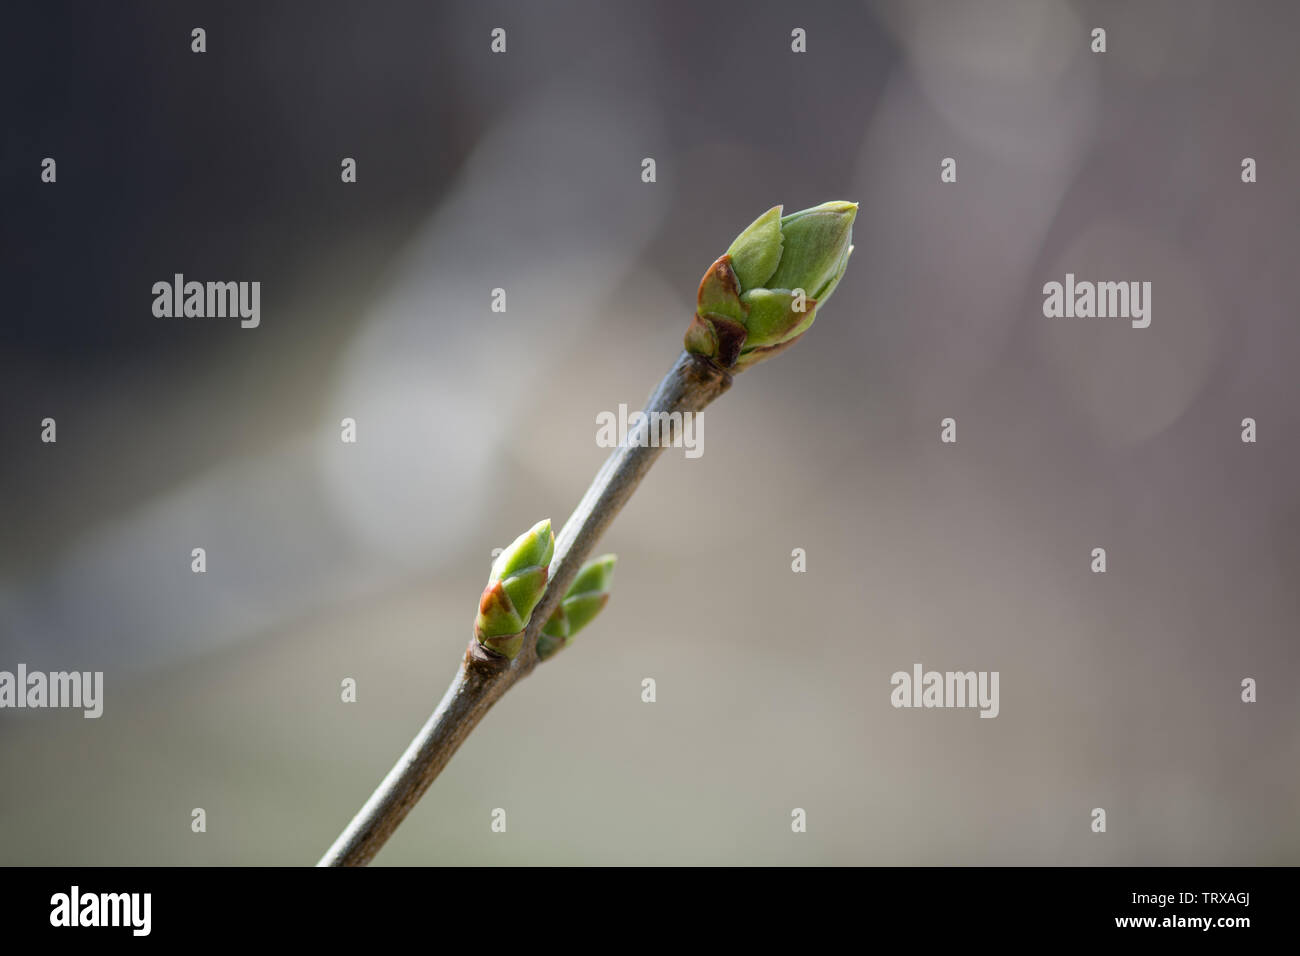 Young buds on a branch of purple lilac in early spring close-up on a blurred background. Horizontal photography Stock Photo